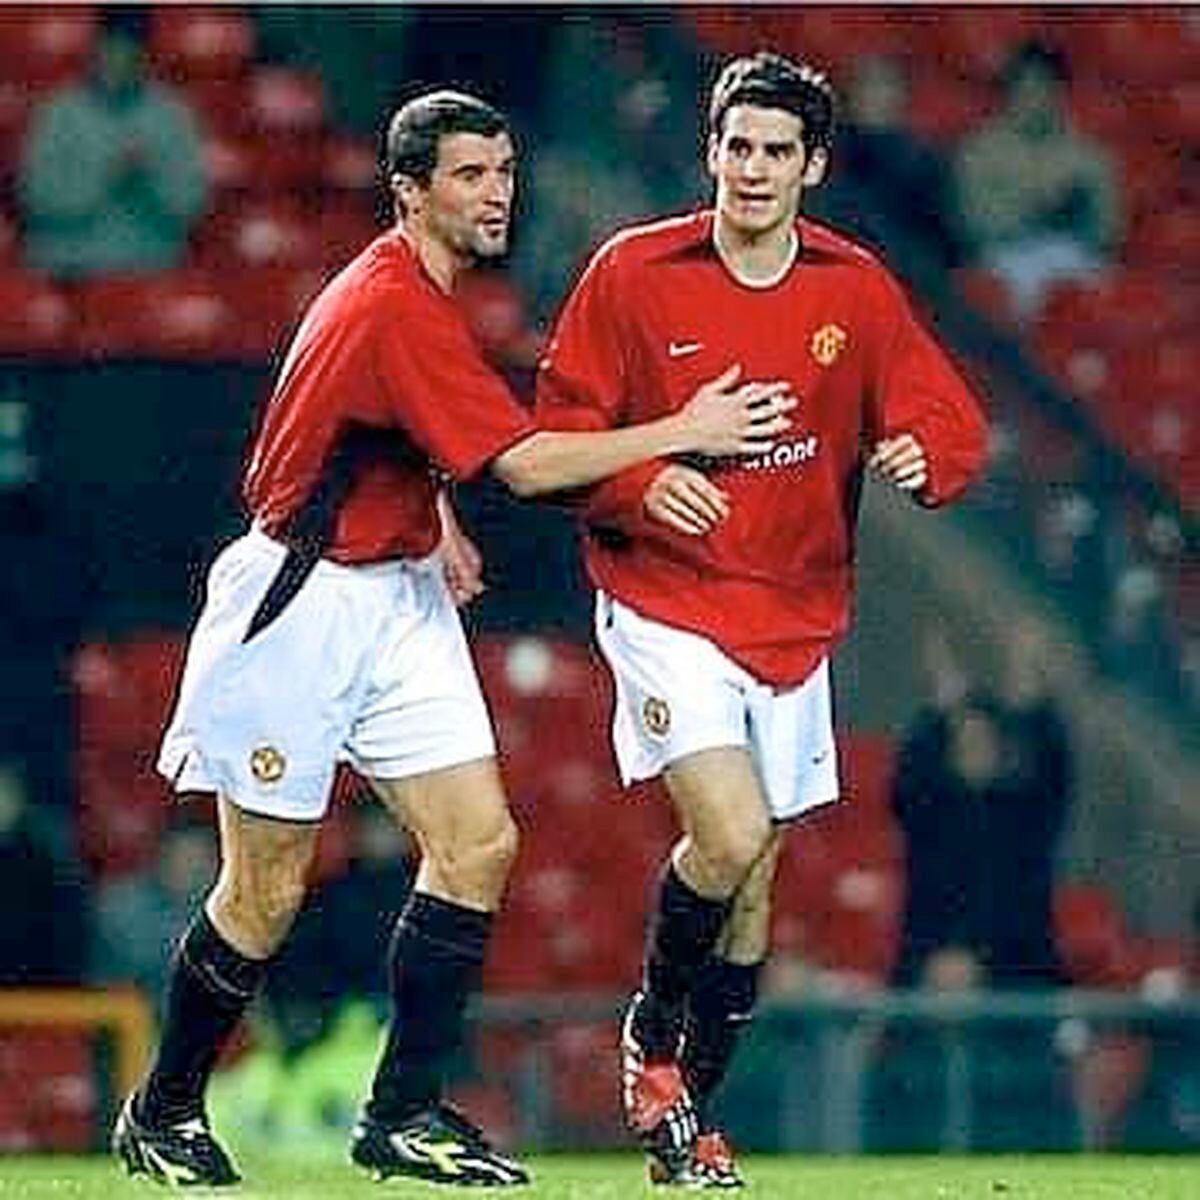 Daniel Nardiello in action against Maccabi Haifia for Manchester United. Inset, with captain and club legend Roy Keane.